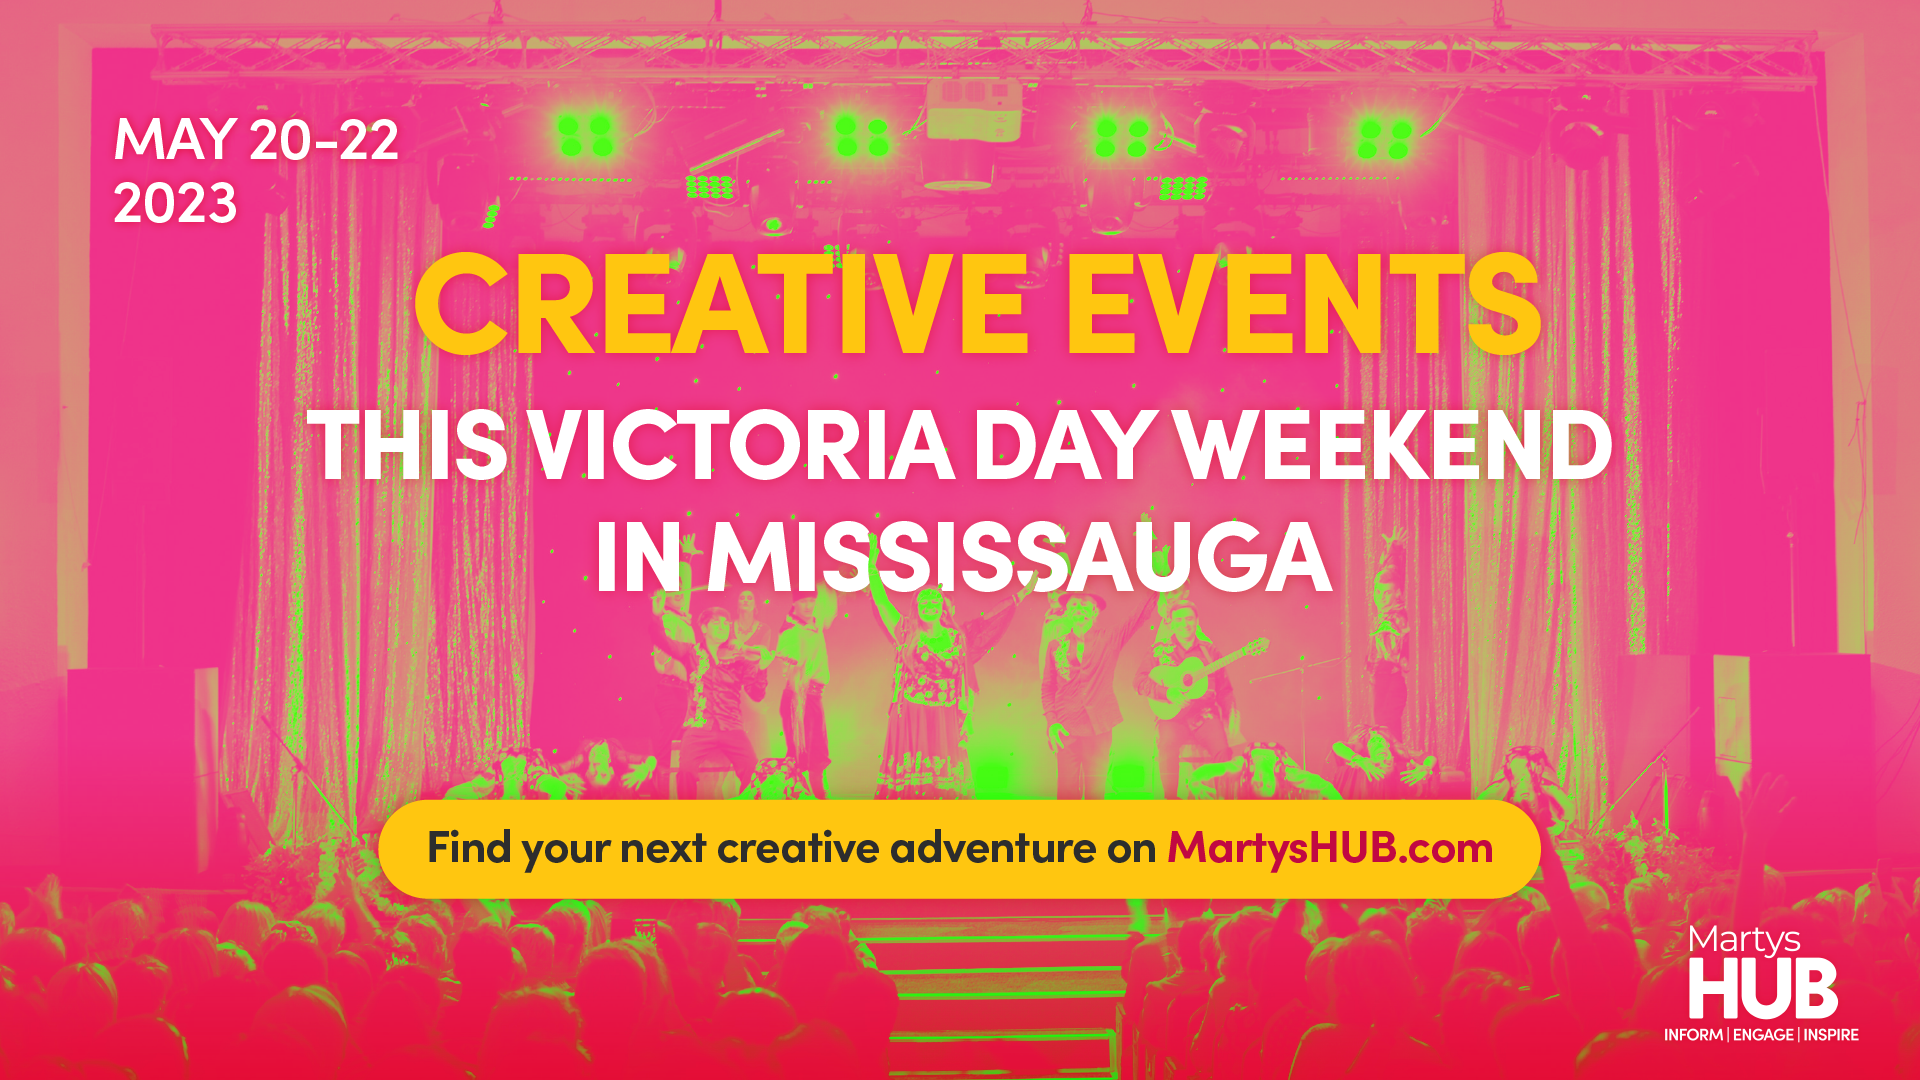 Looking for something creative to do in Mississauga this Victoria Day Weekend? (MAY 20-22)